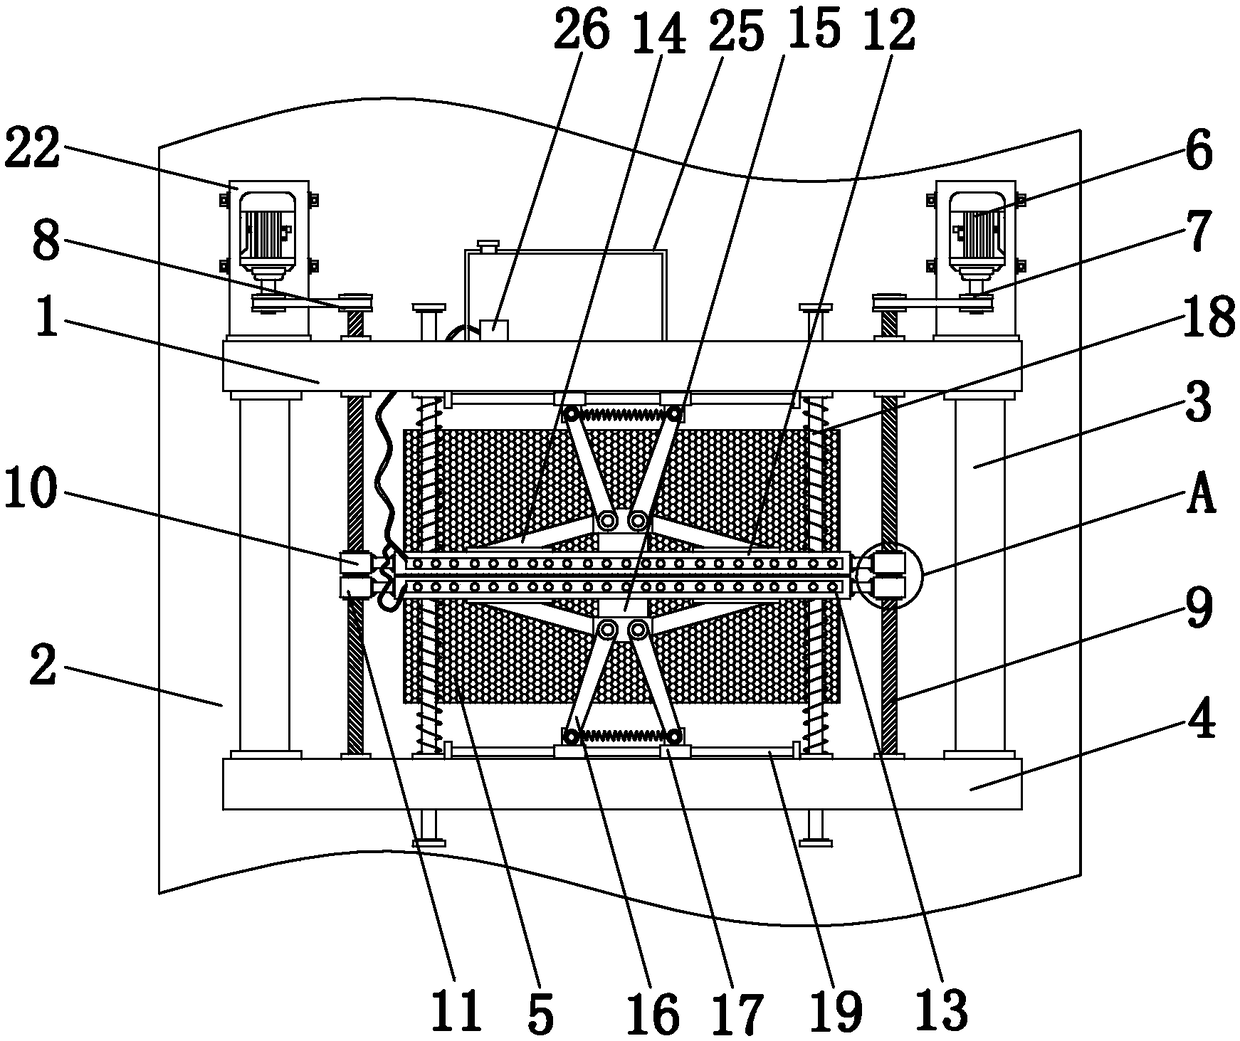 Dust removal device for removing dust on surface of LED display screen